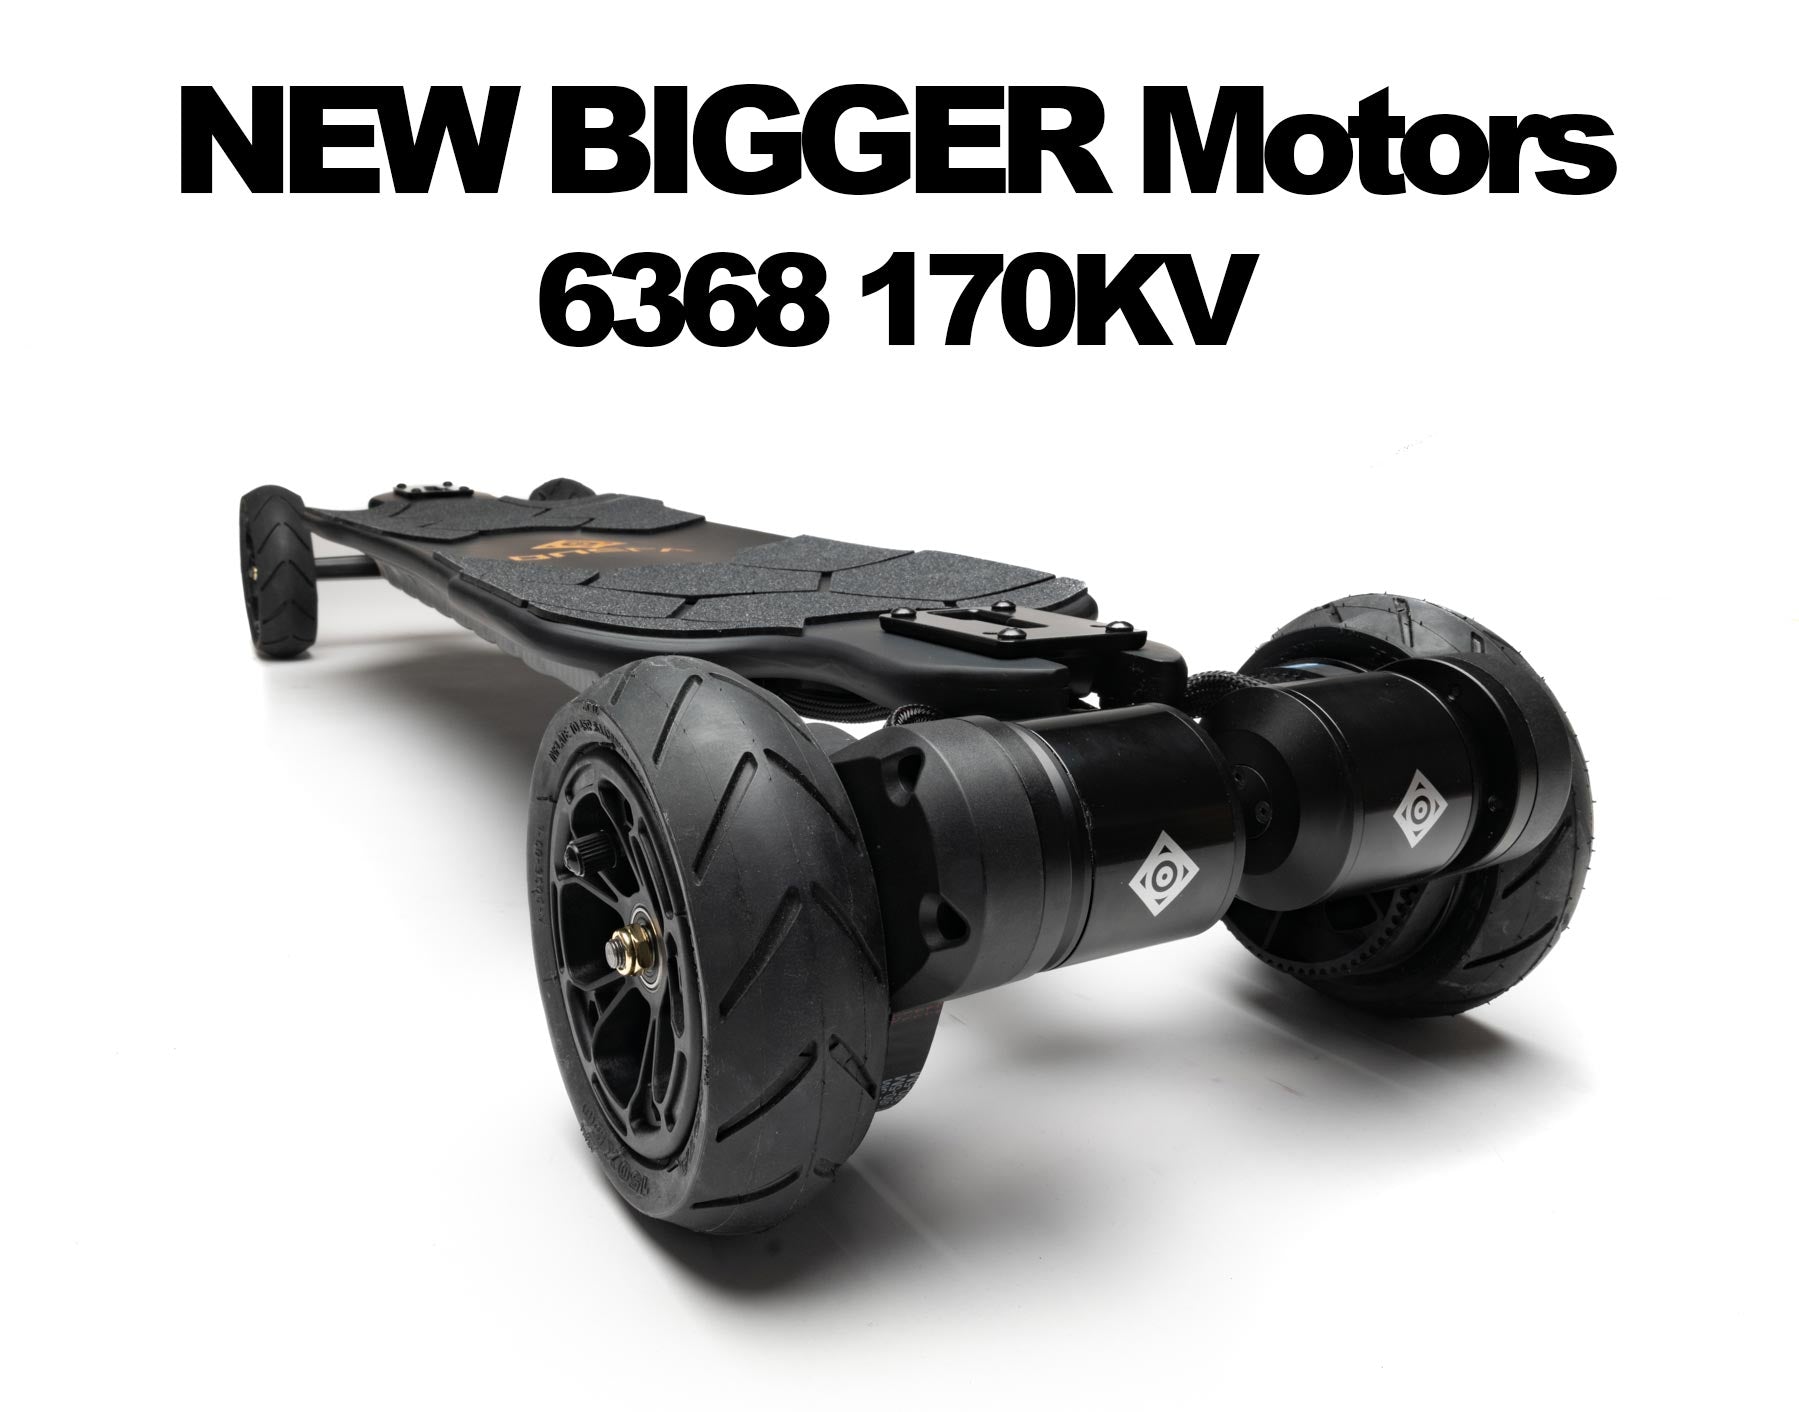 The best electric Skateboard 2 in 1. ONSRA Black Carve 2 Belt Drive with 115mm Rubber Wheels or 150mm AT wheels. Electric Longboard with double kingpin and Belt Drive.